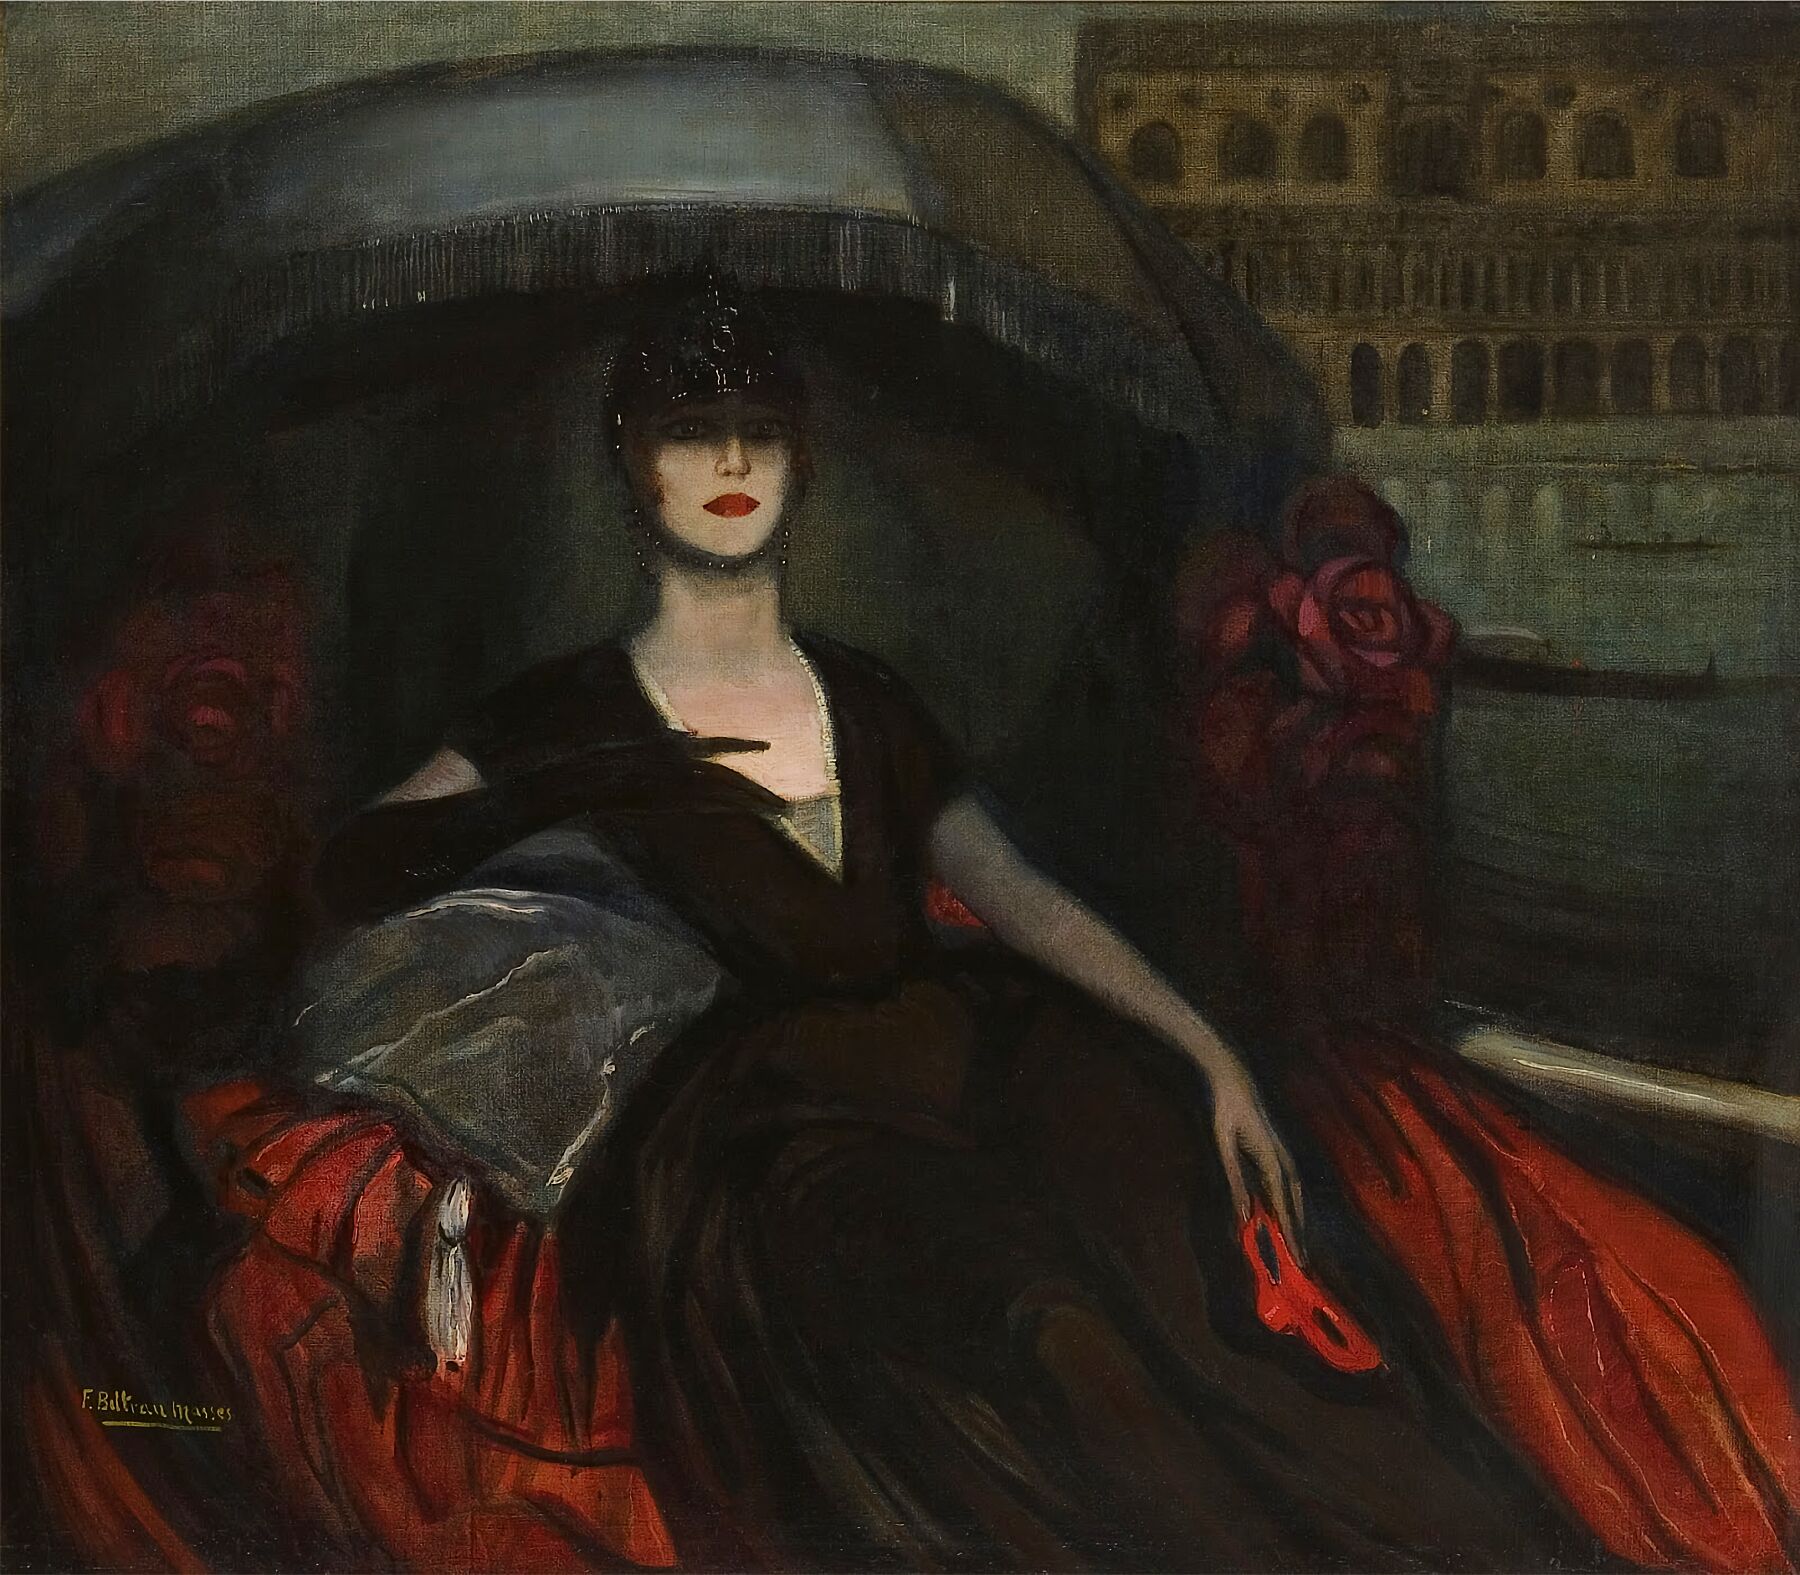 Madame Bonnardel, Countess of Montgomery by Grederico Beltran Masses - 1934